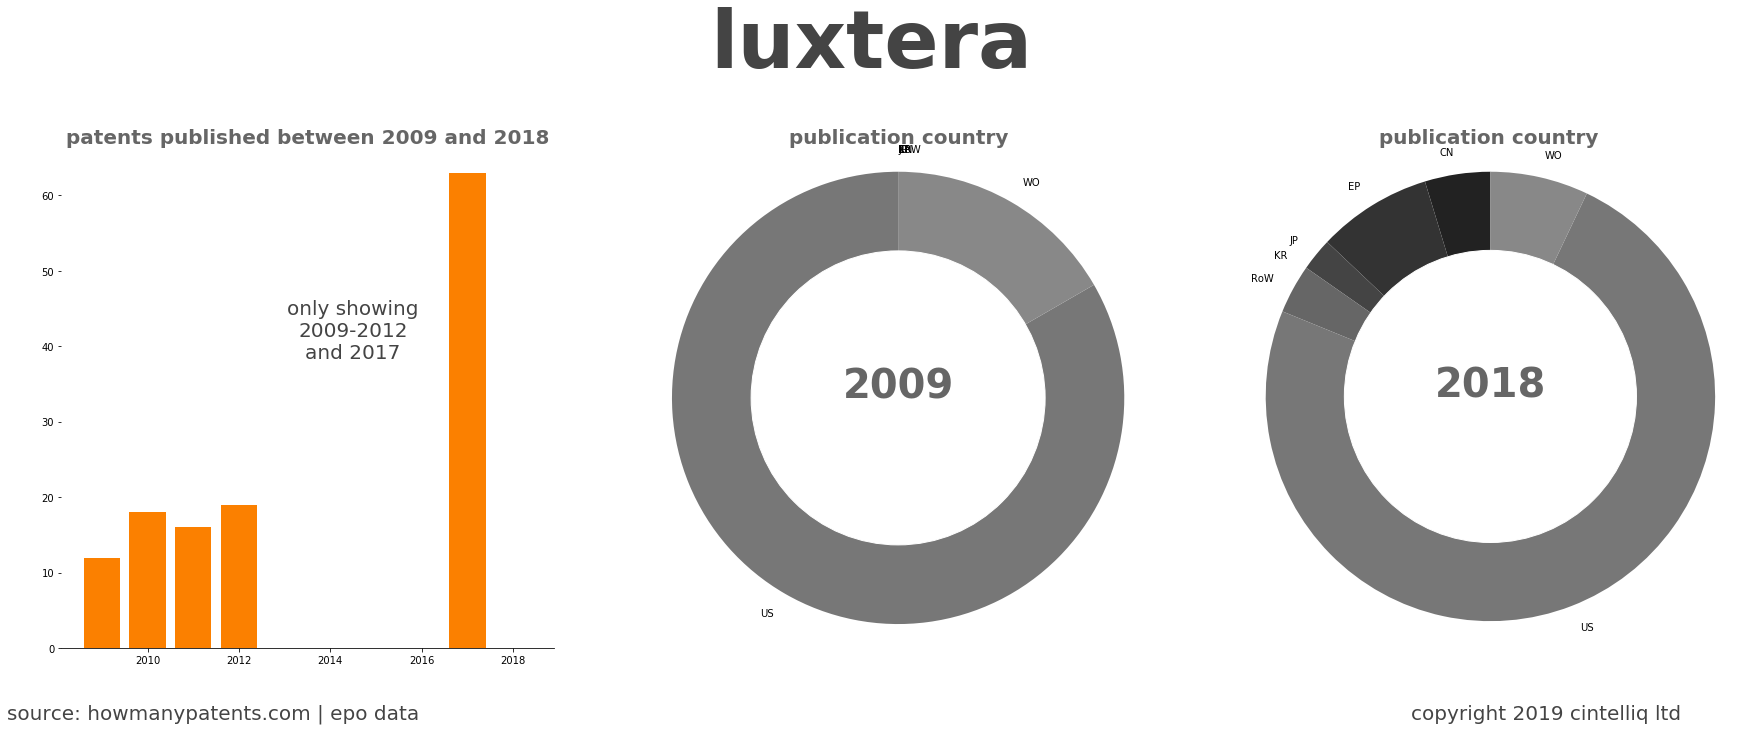 summary of patents for Luxtera